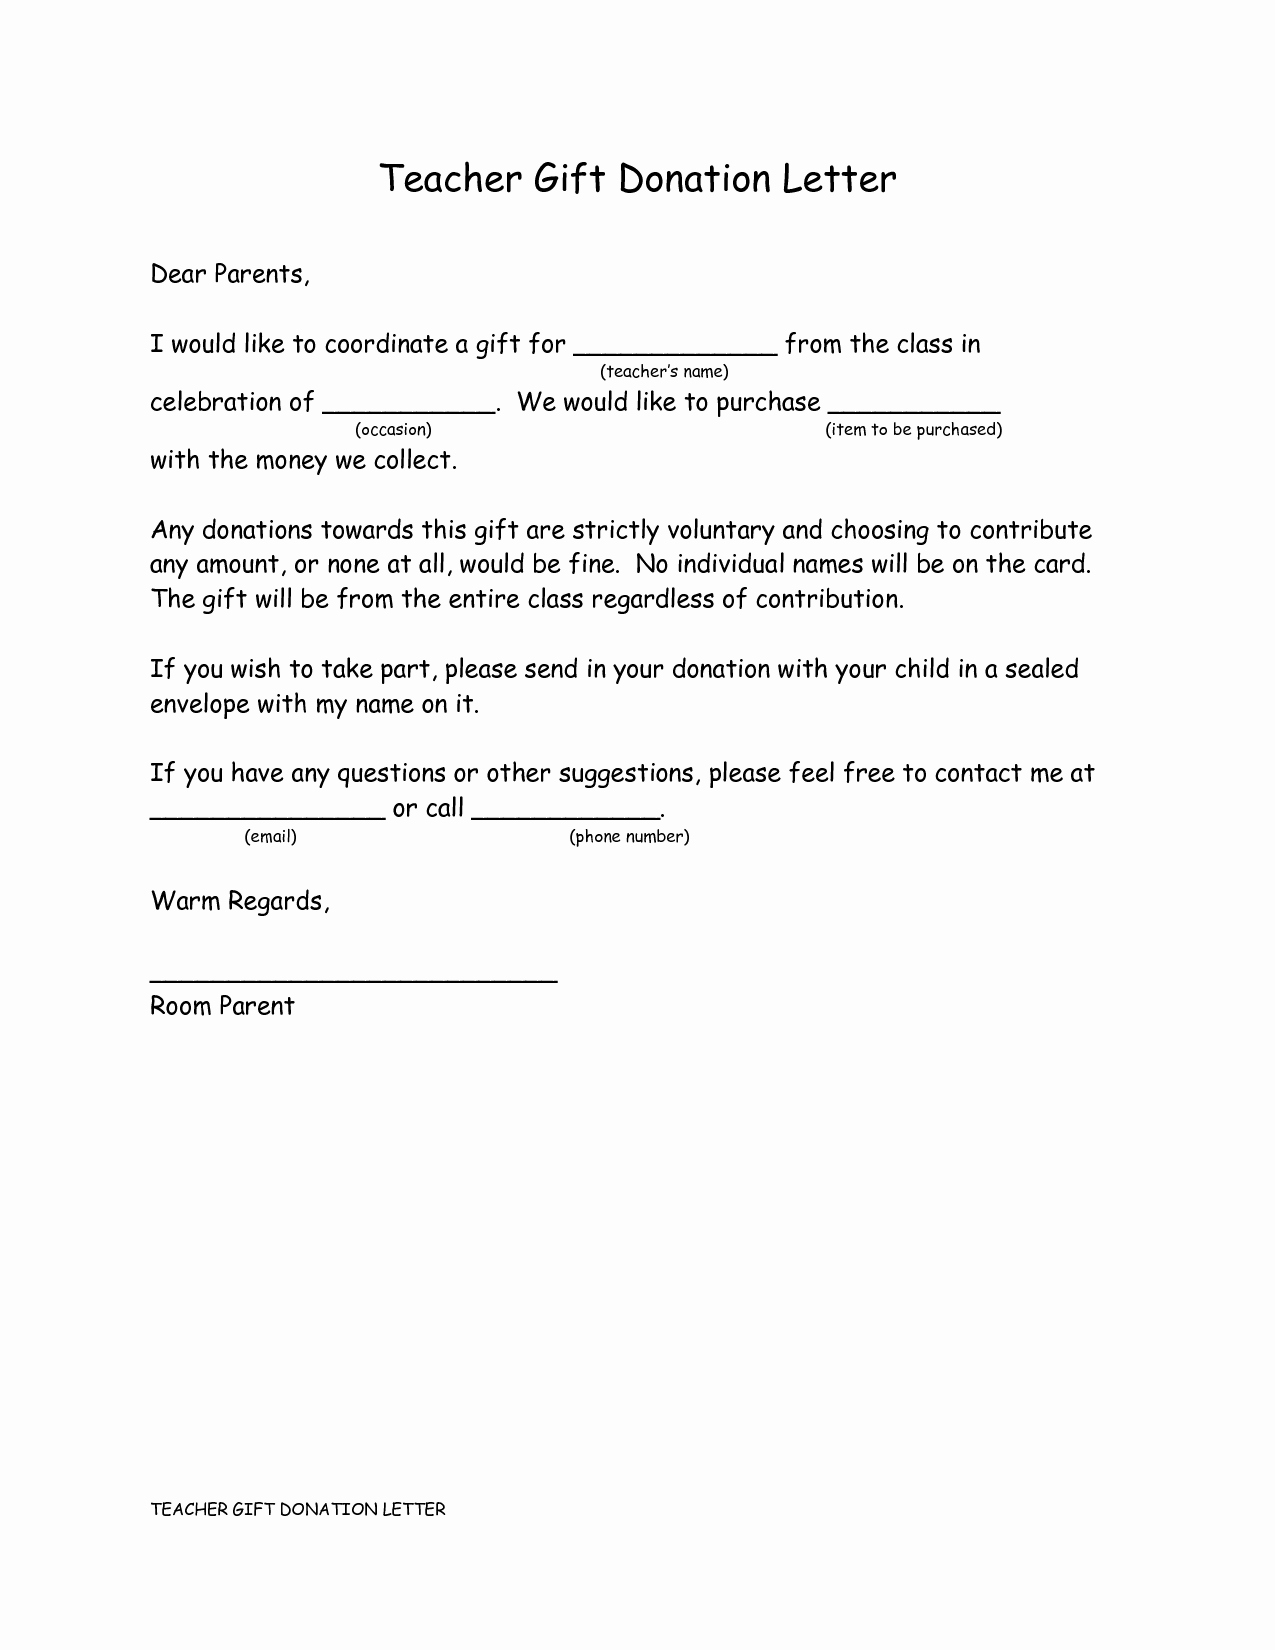 Letter to Parents Template Beautiful Room Parent Gift Letter School Stuff